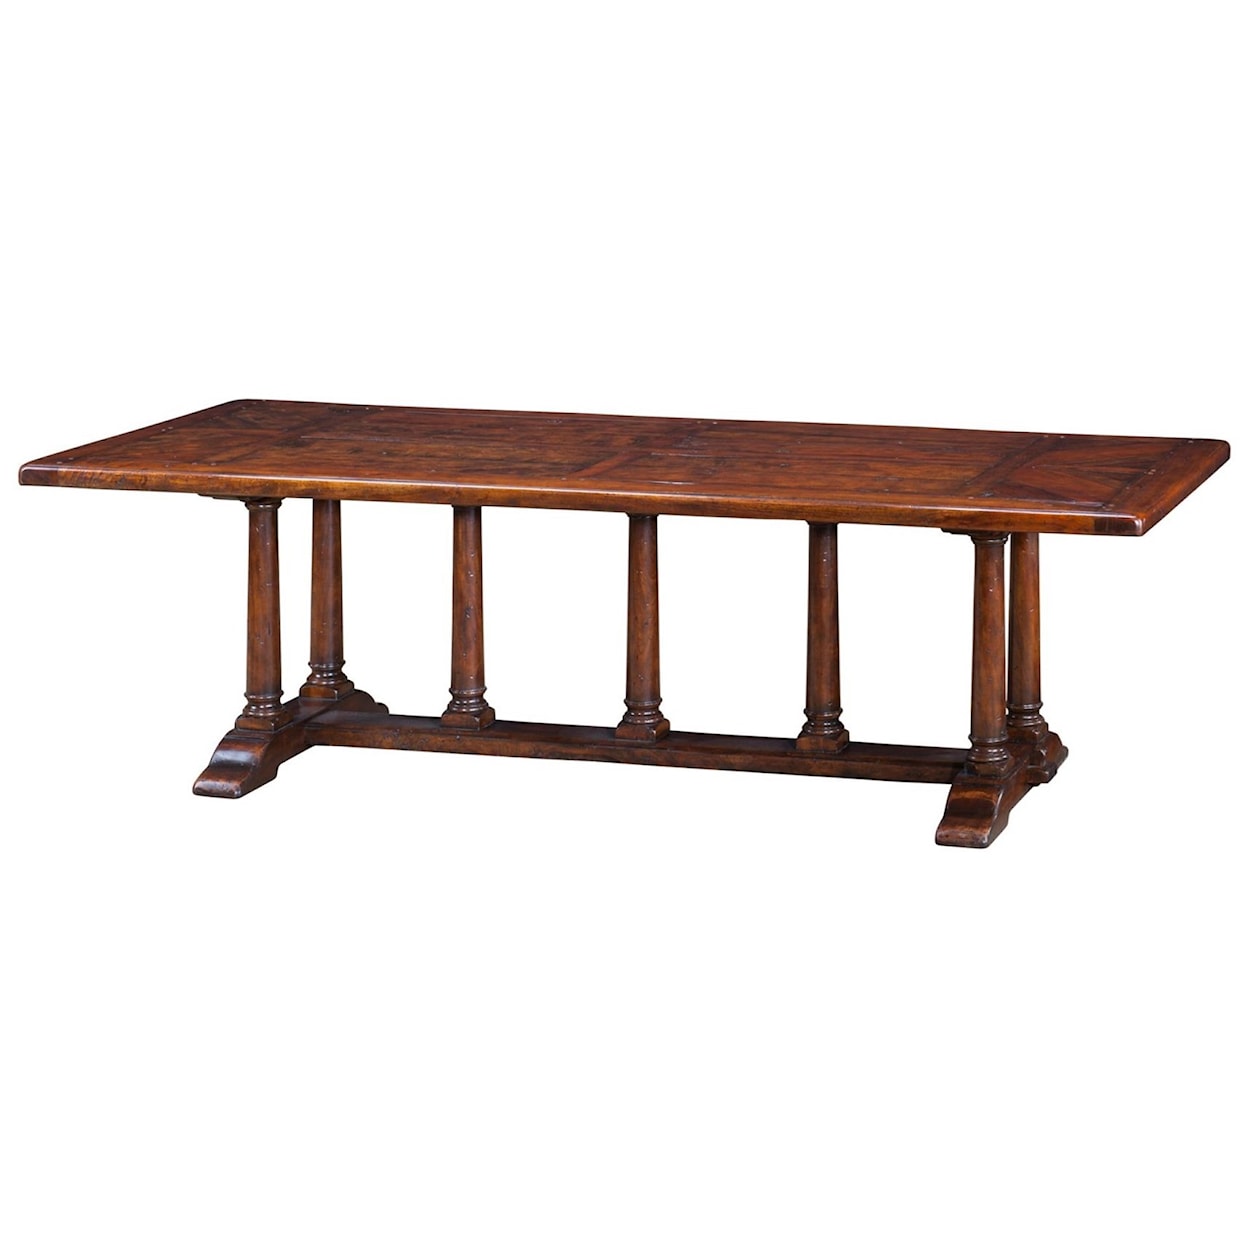 Theodore Alexander Castle Bromwich A Mellow Classic Dining Table